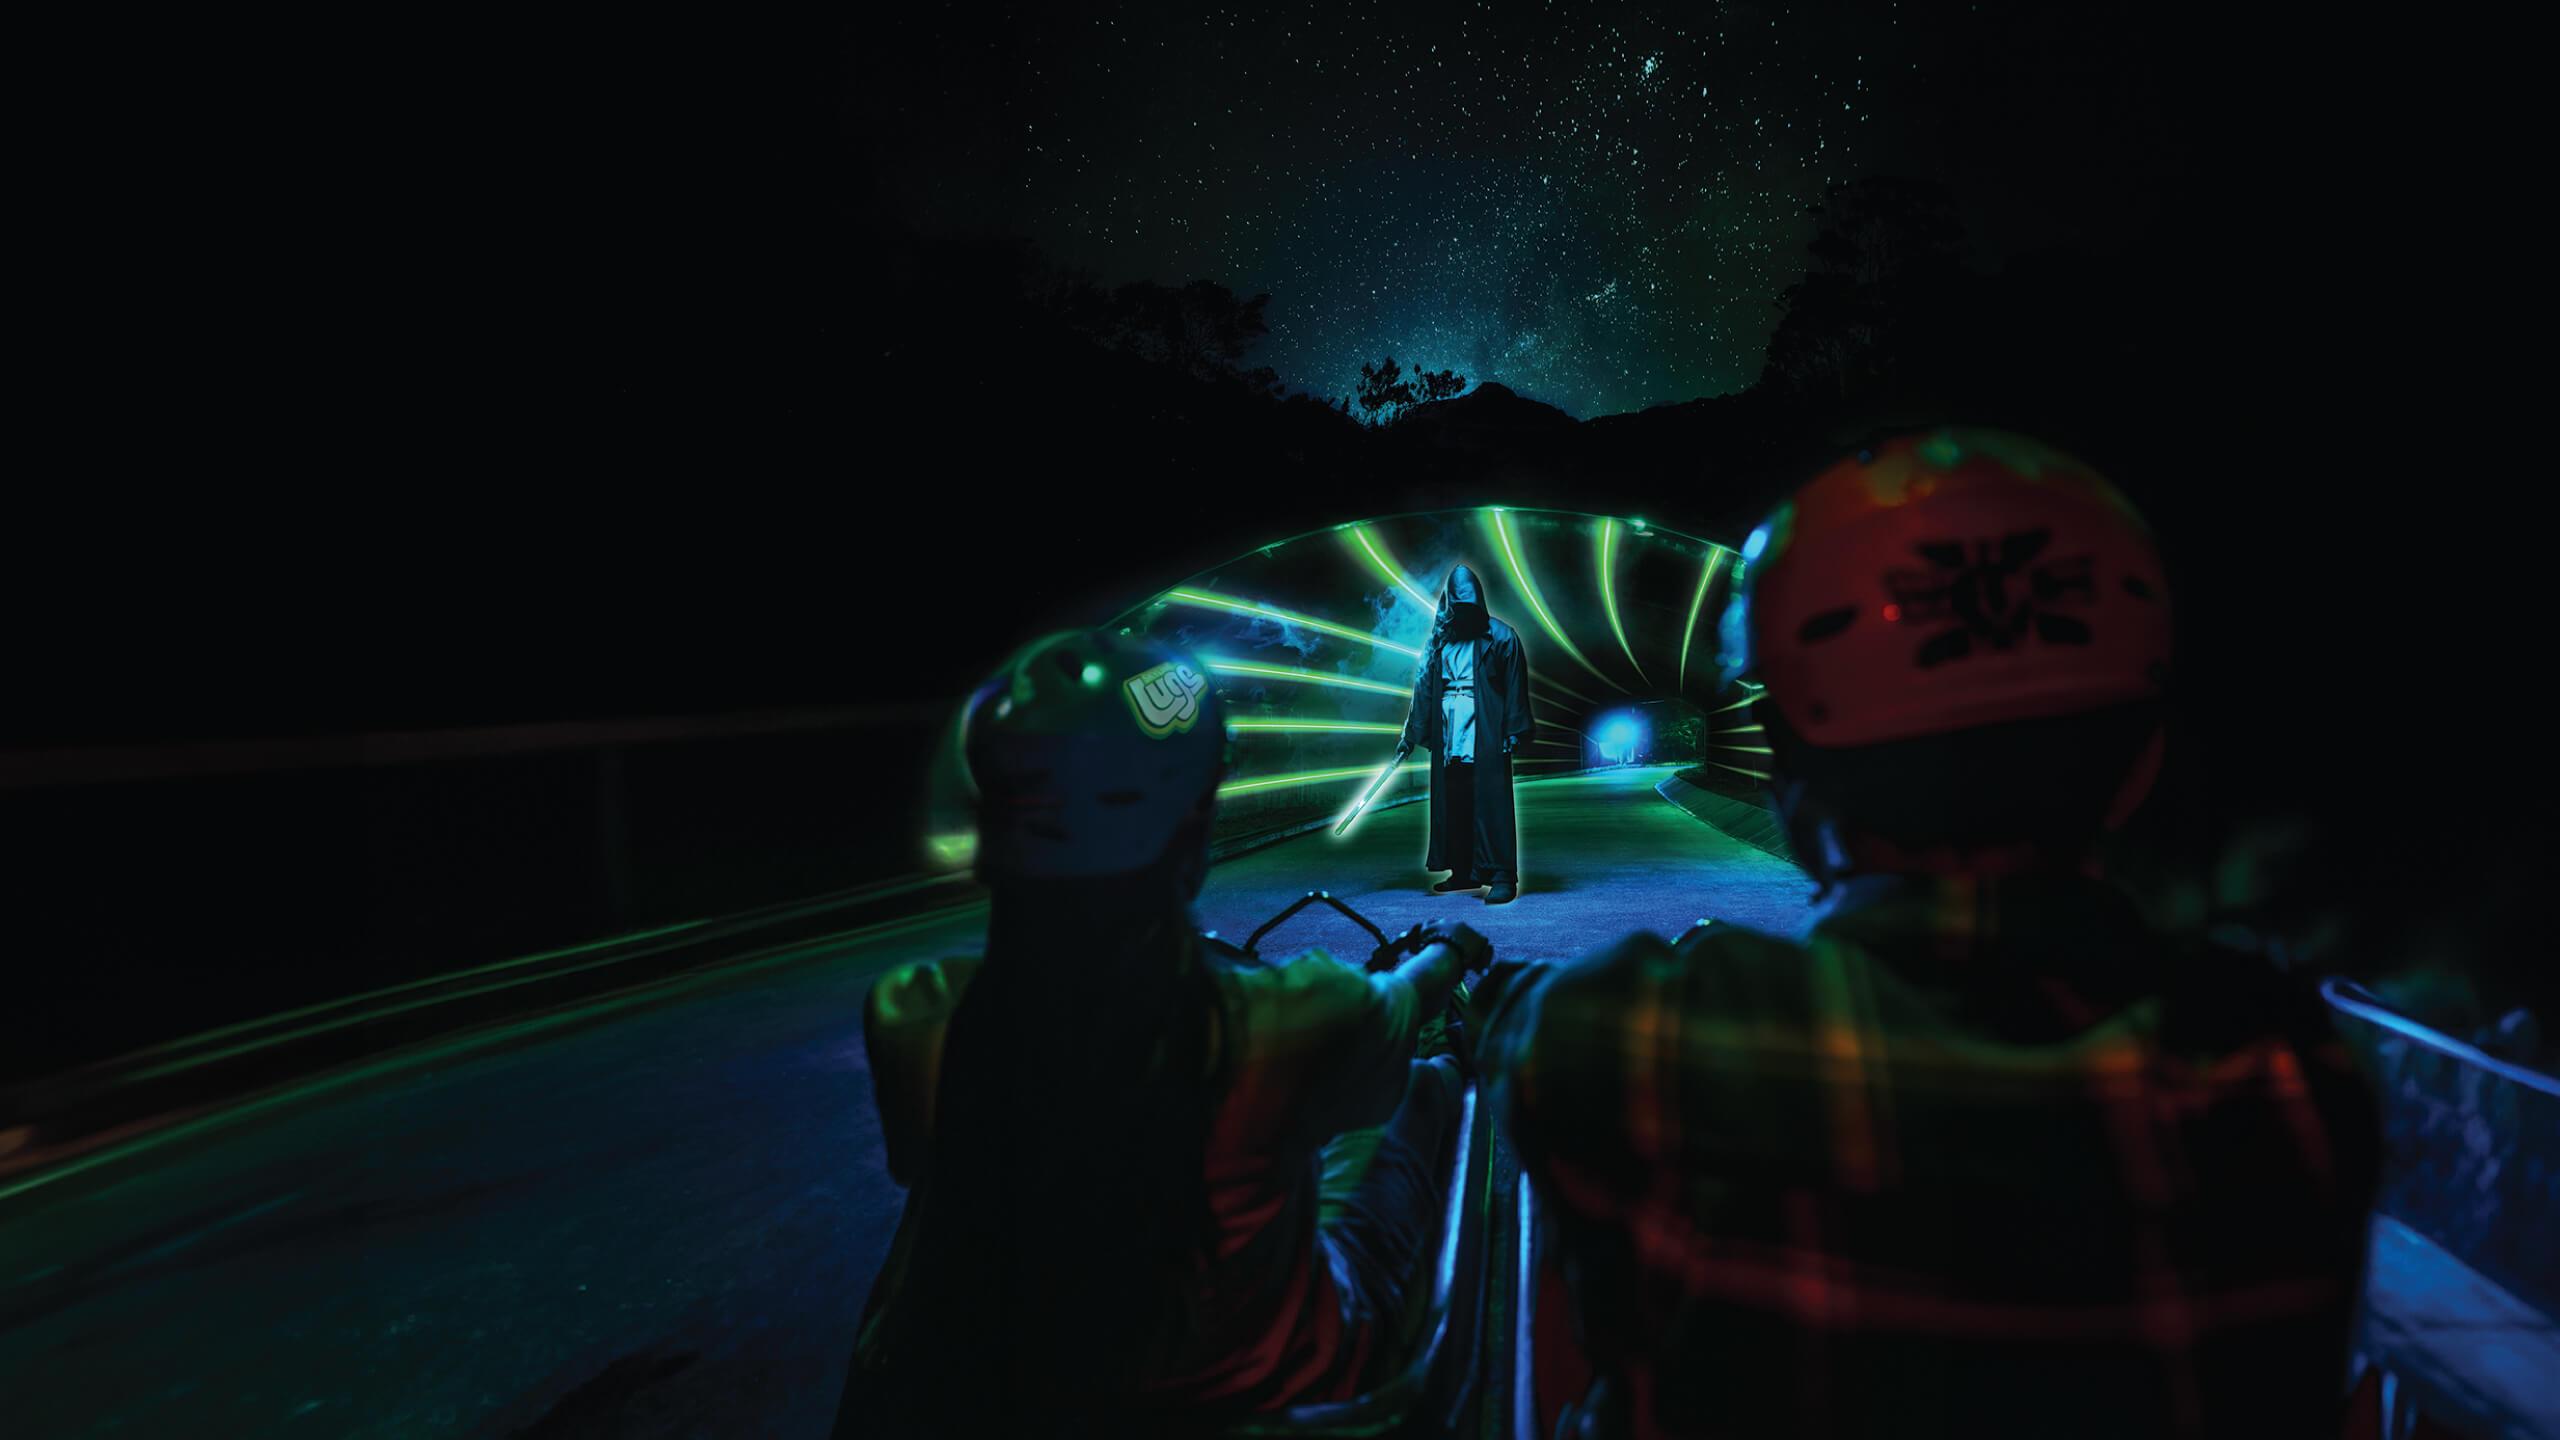 Two people Luge through an immersive light tunnel seeing a person holding a lightsabre.